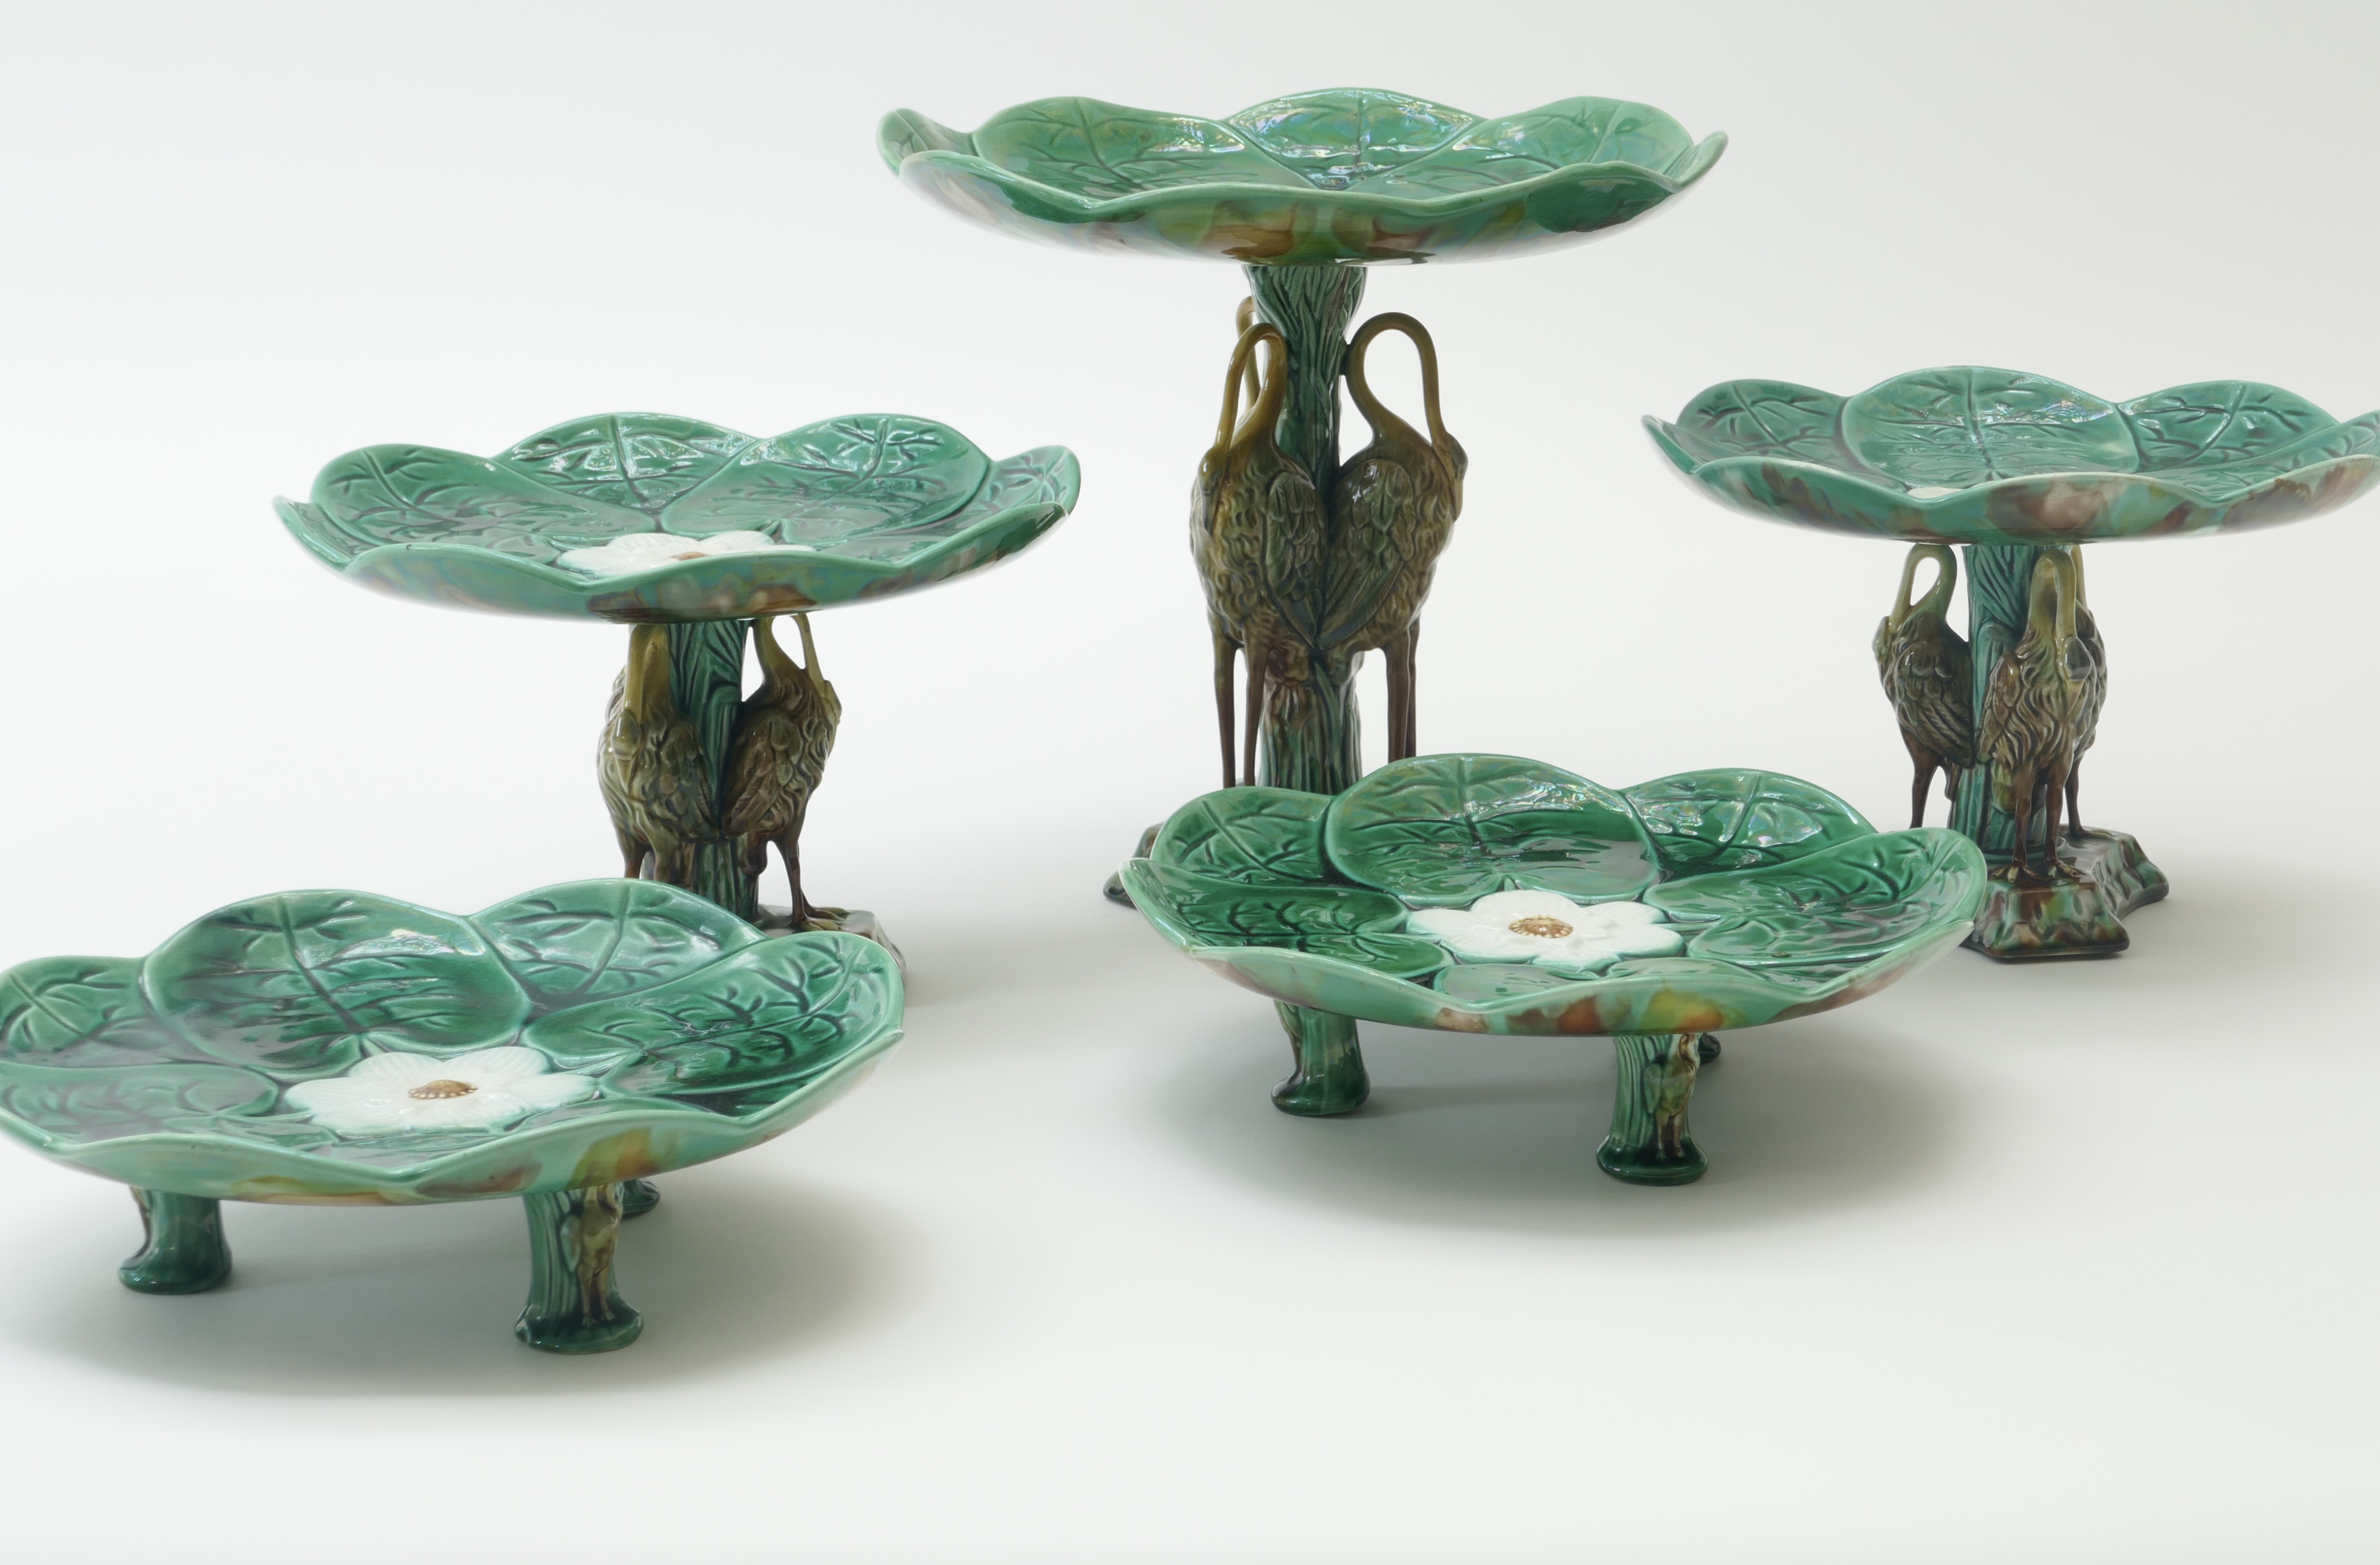 Sold - Set of 5 Majolica Pond Lily and Stork Cake Stands